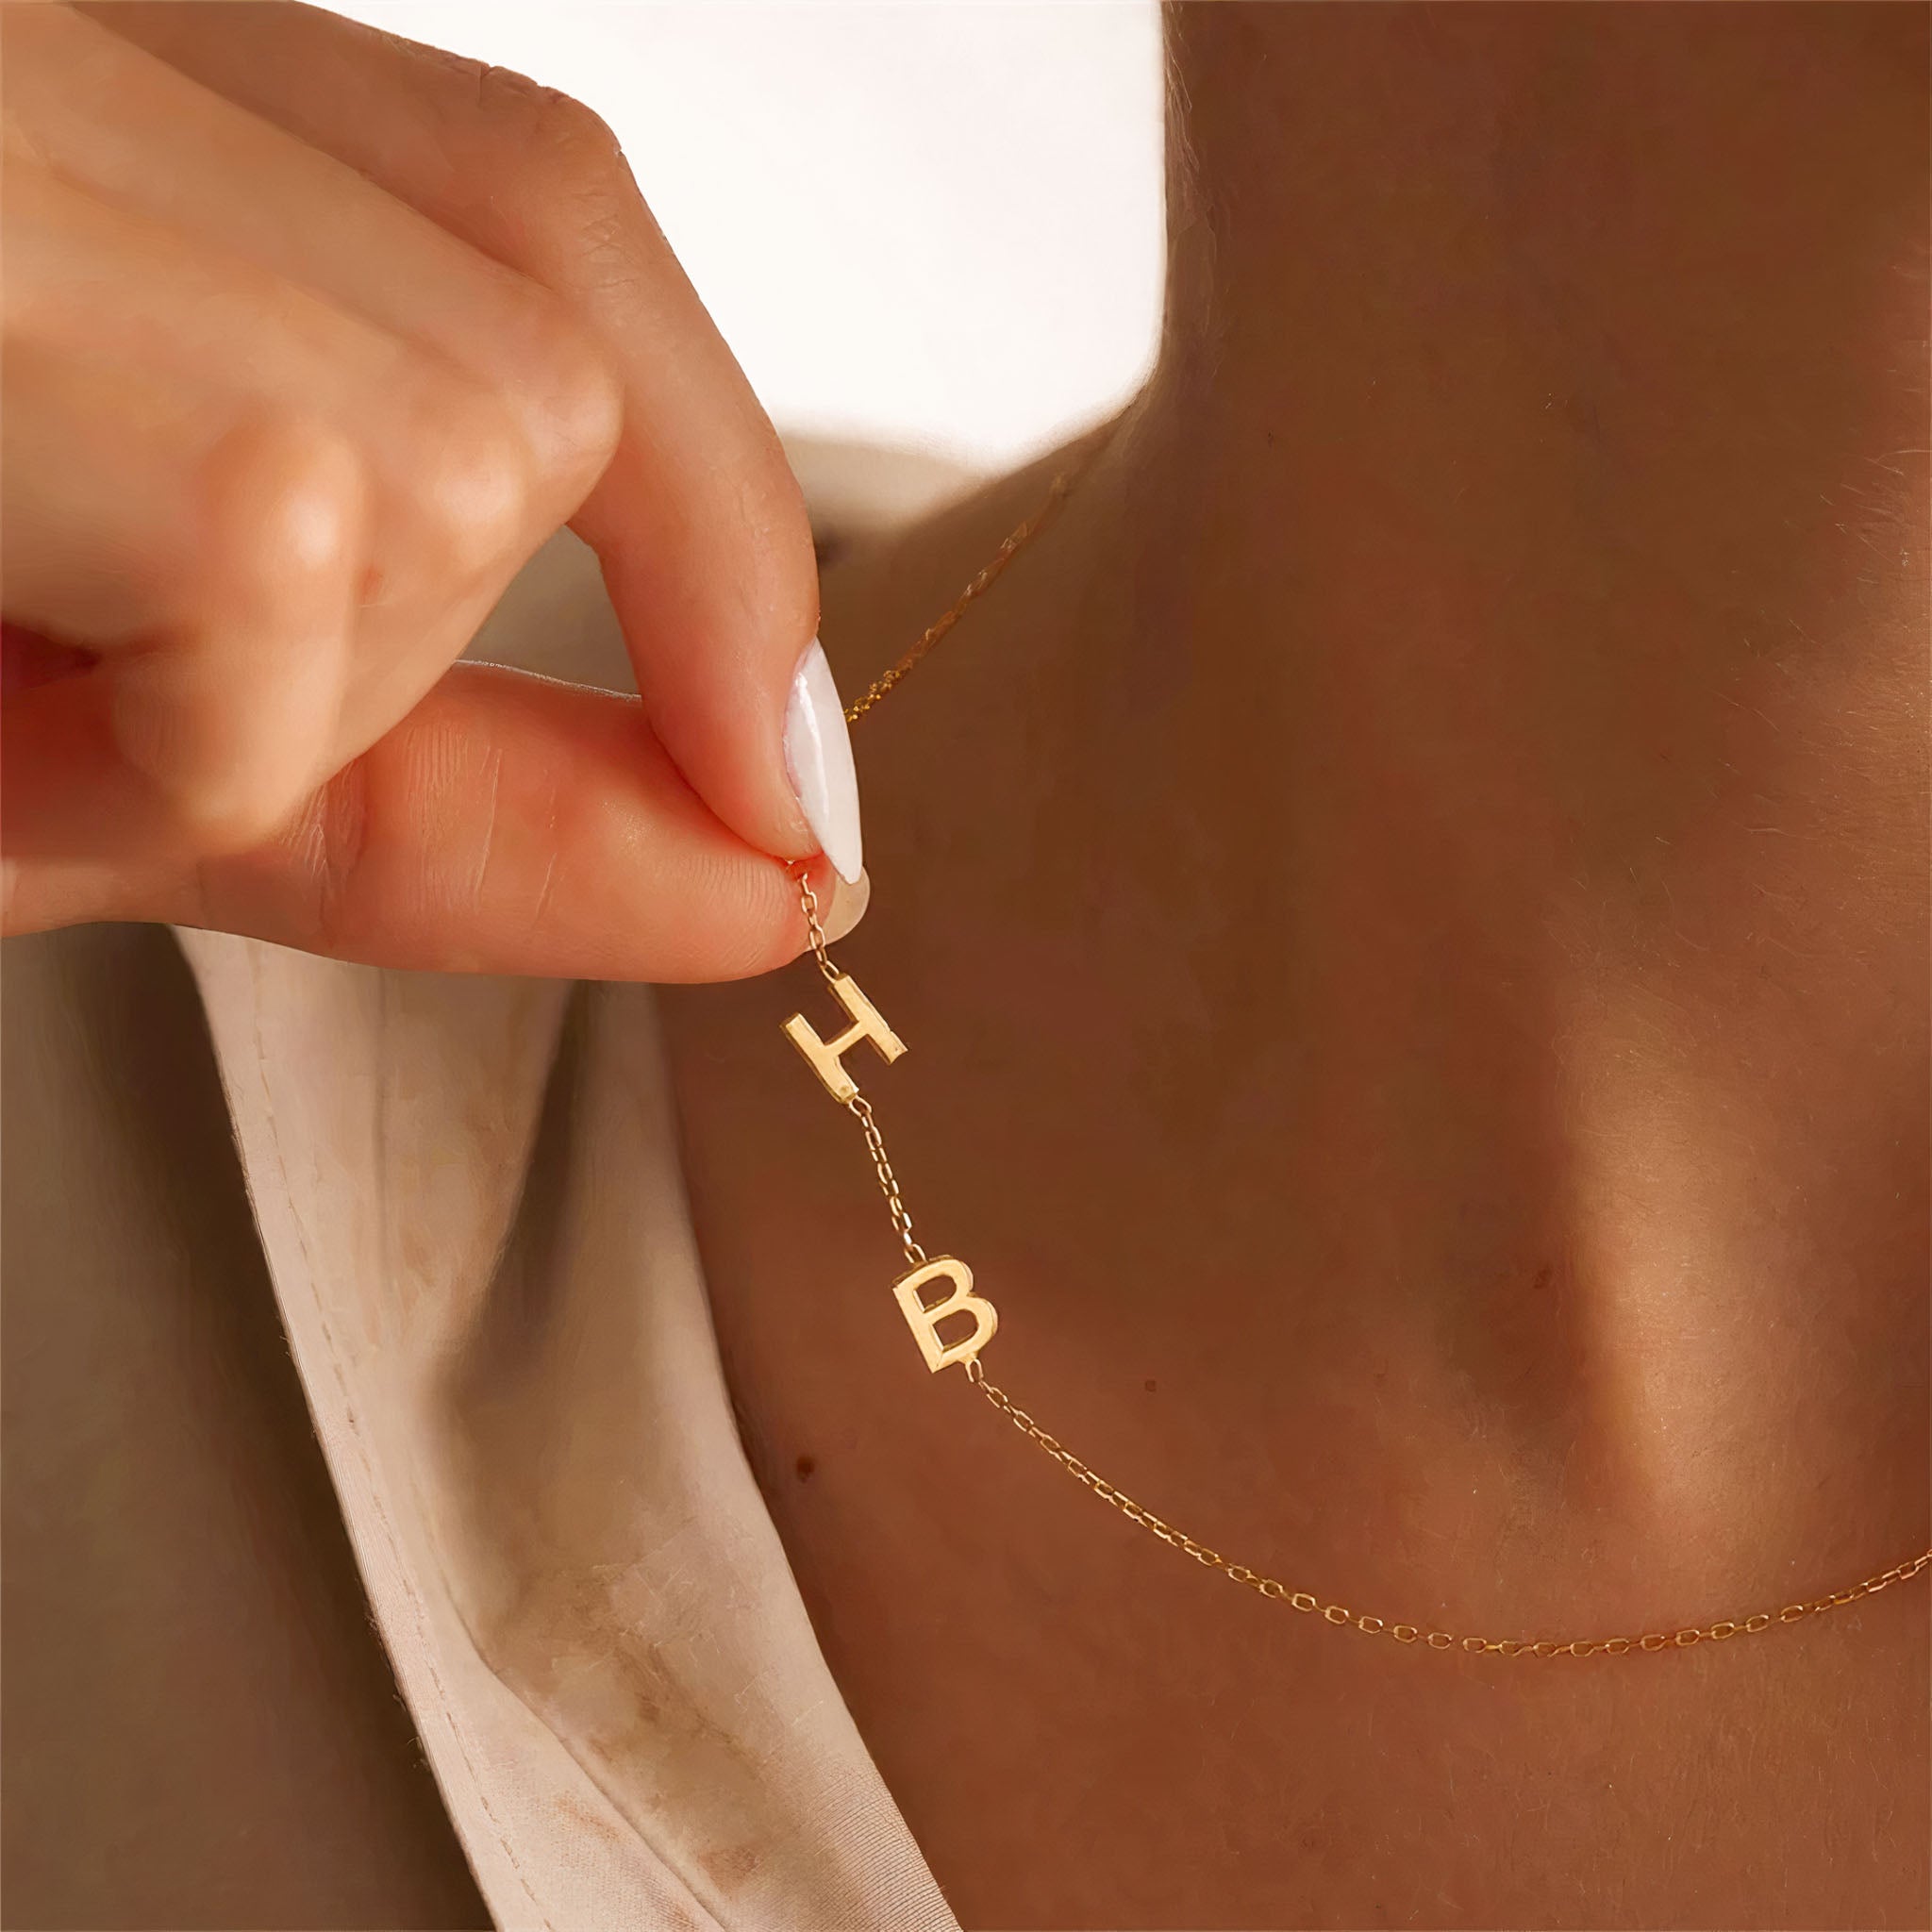 14K Solid Gold Sideways Initial Necklace - Up to 4 Letters – Be Monogrammed